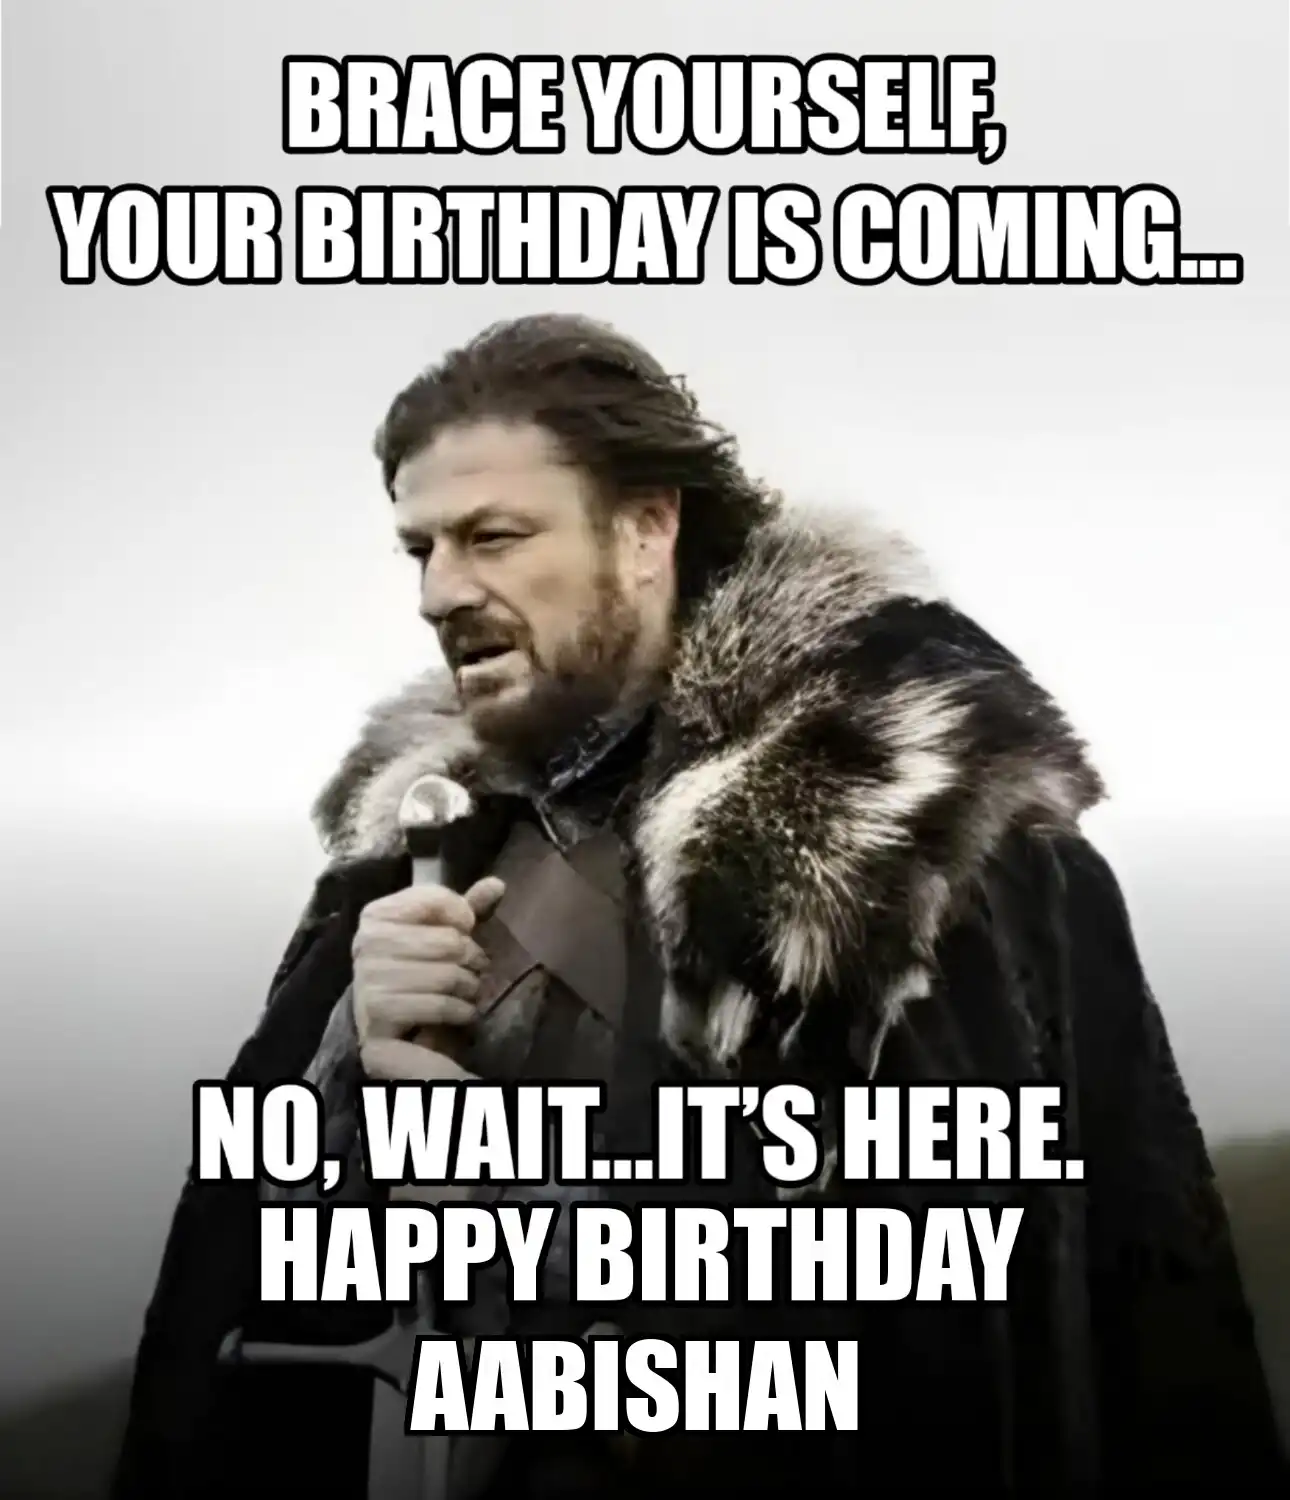 Happy Birthday Aabishan Brace Yourself Your Birthday Is Coming Meme